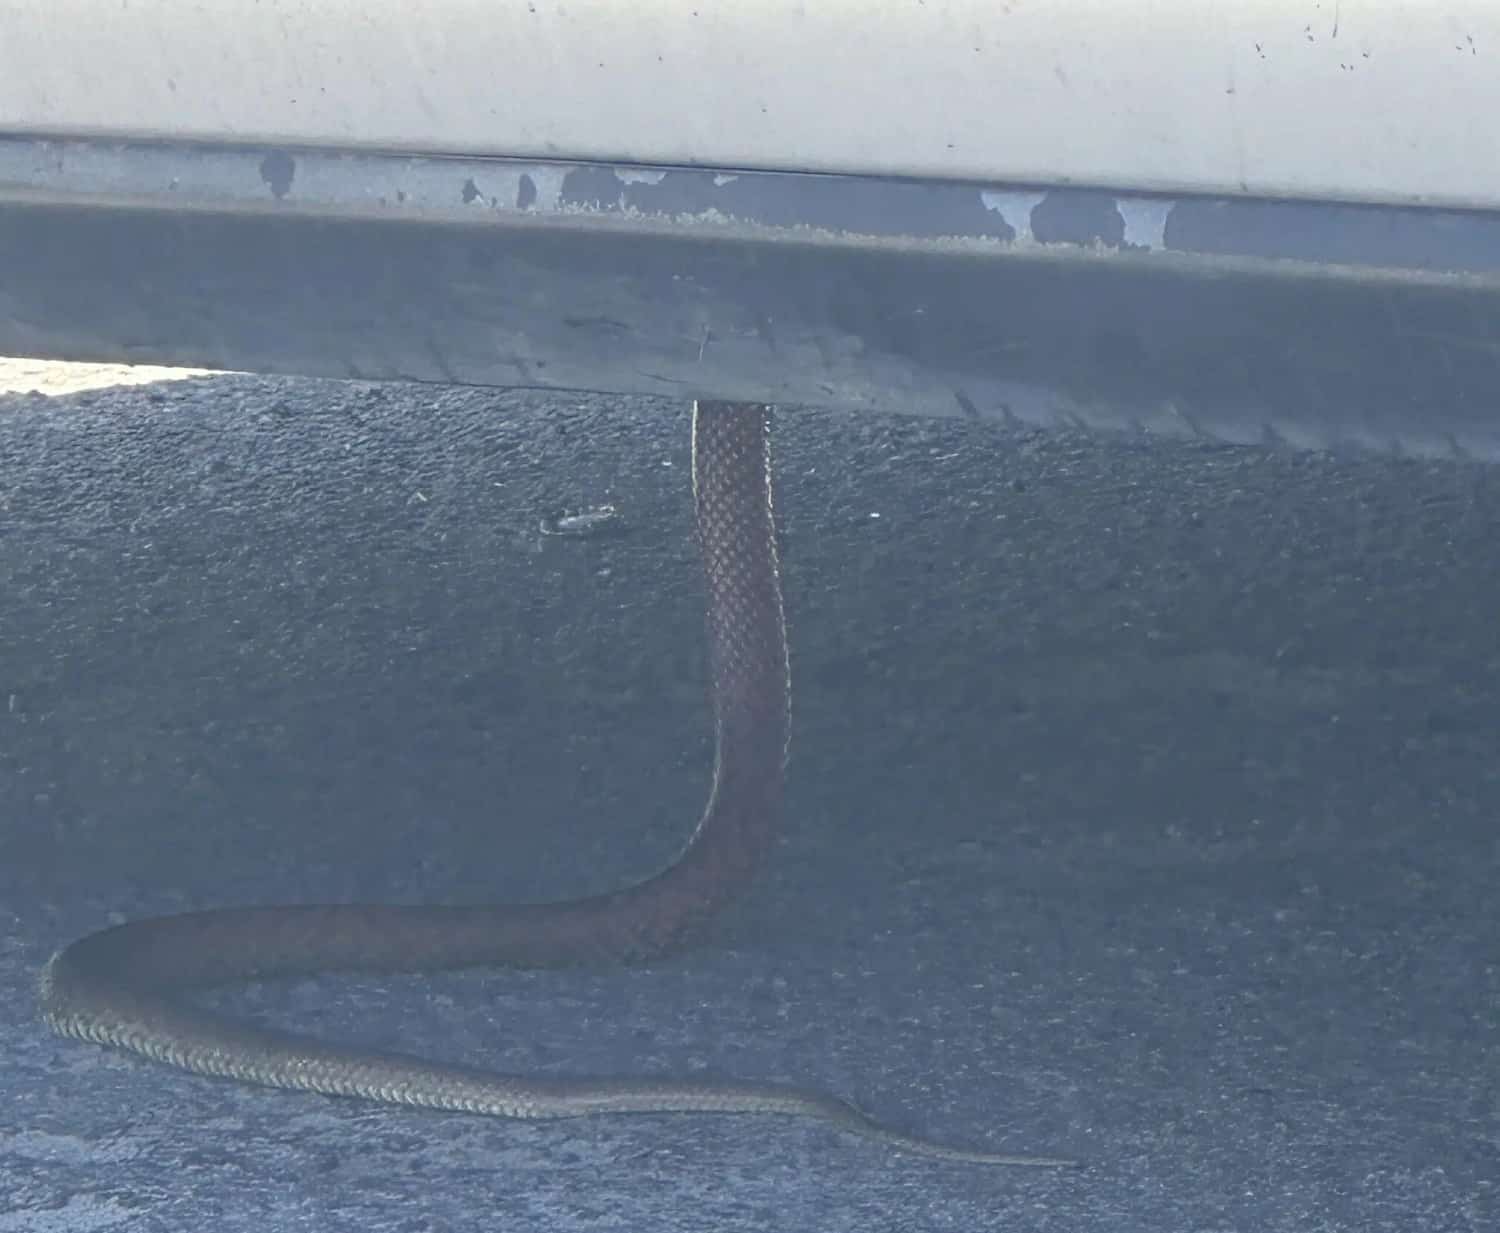 Large King Brown Snake Decides To Make Itself Home in a Tarago in Gero